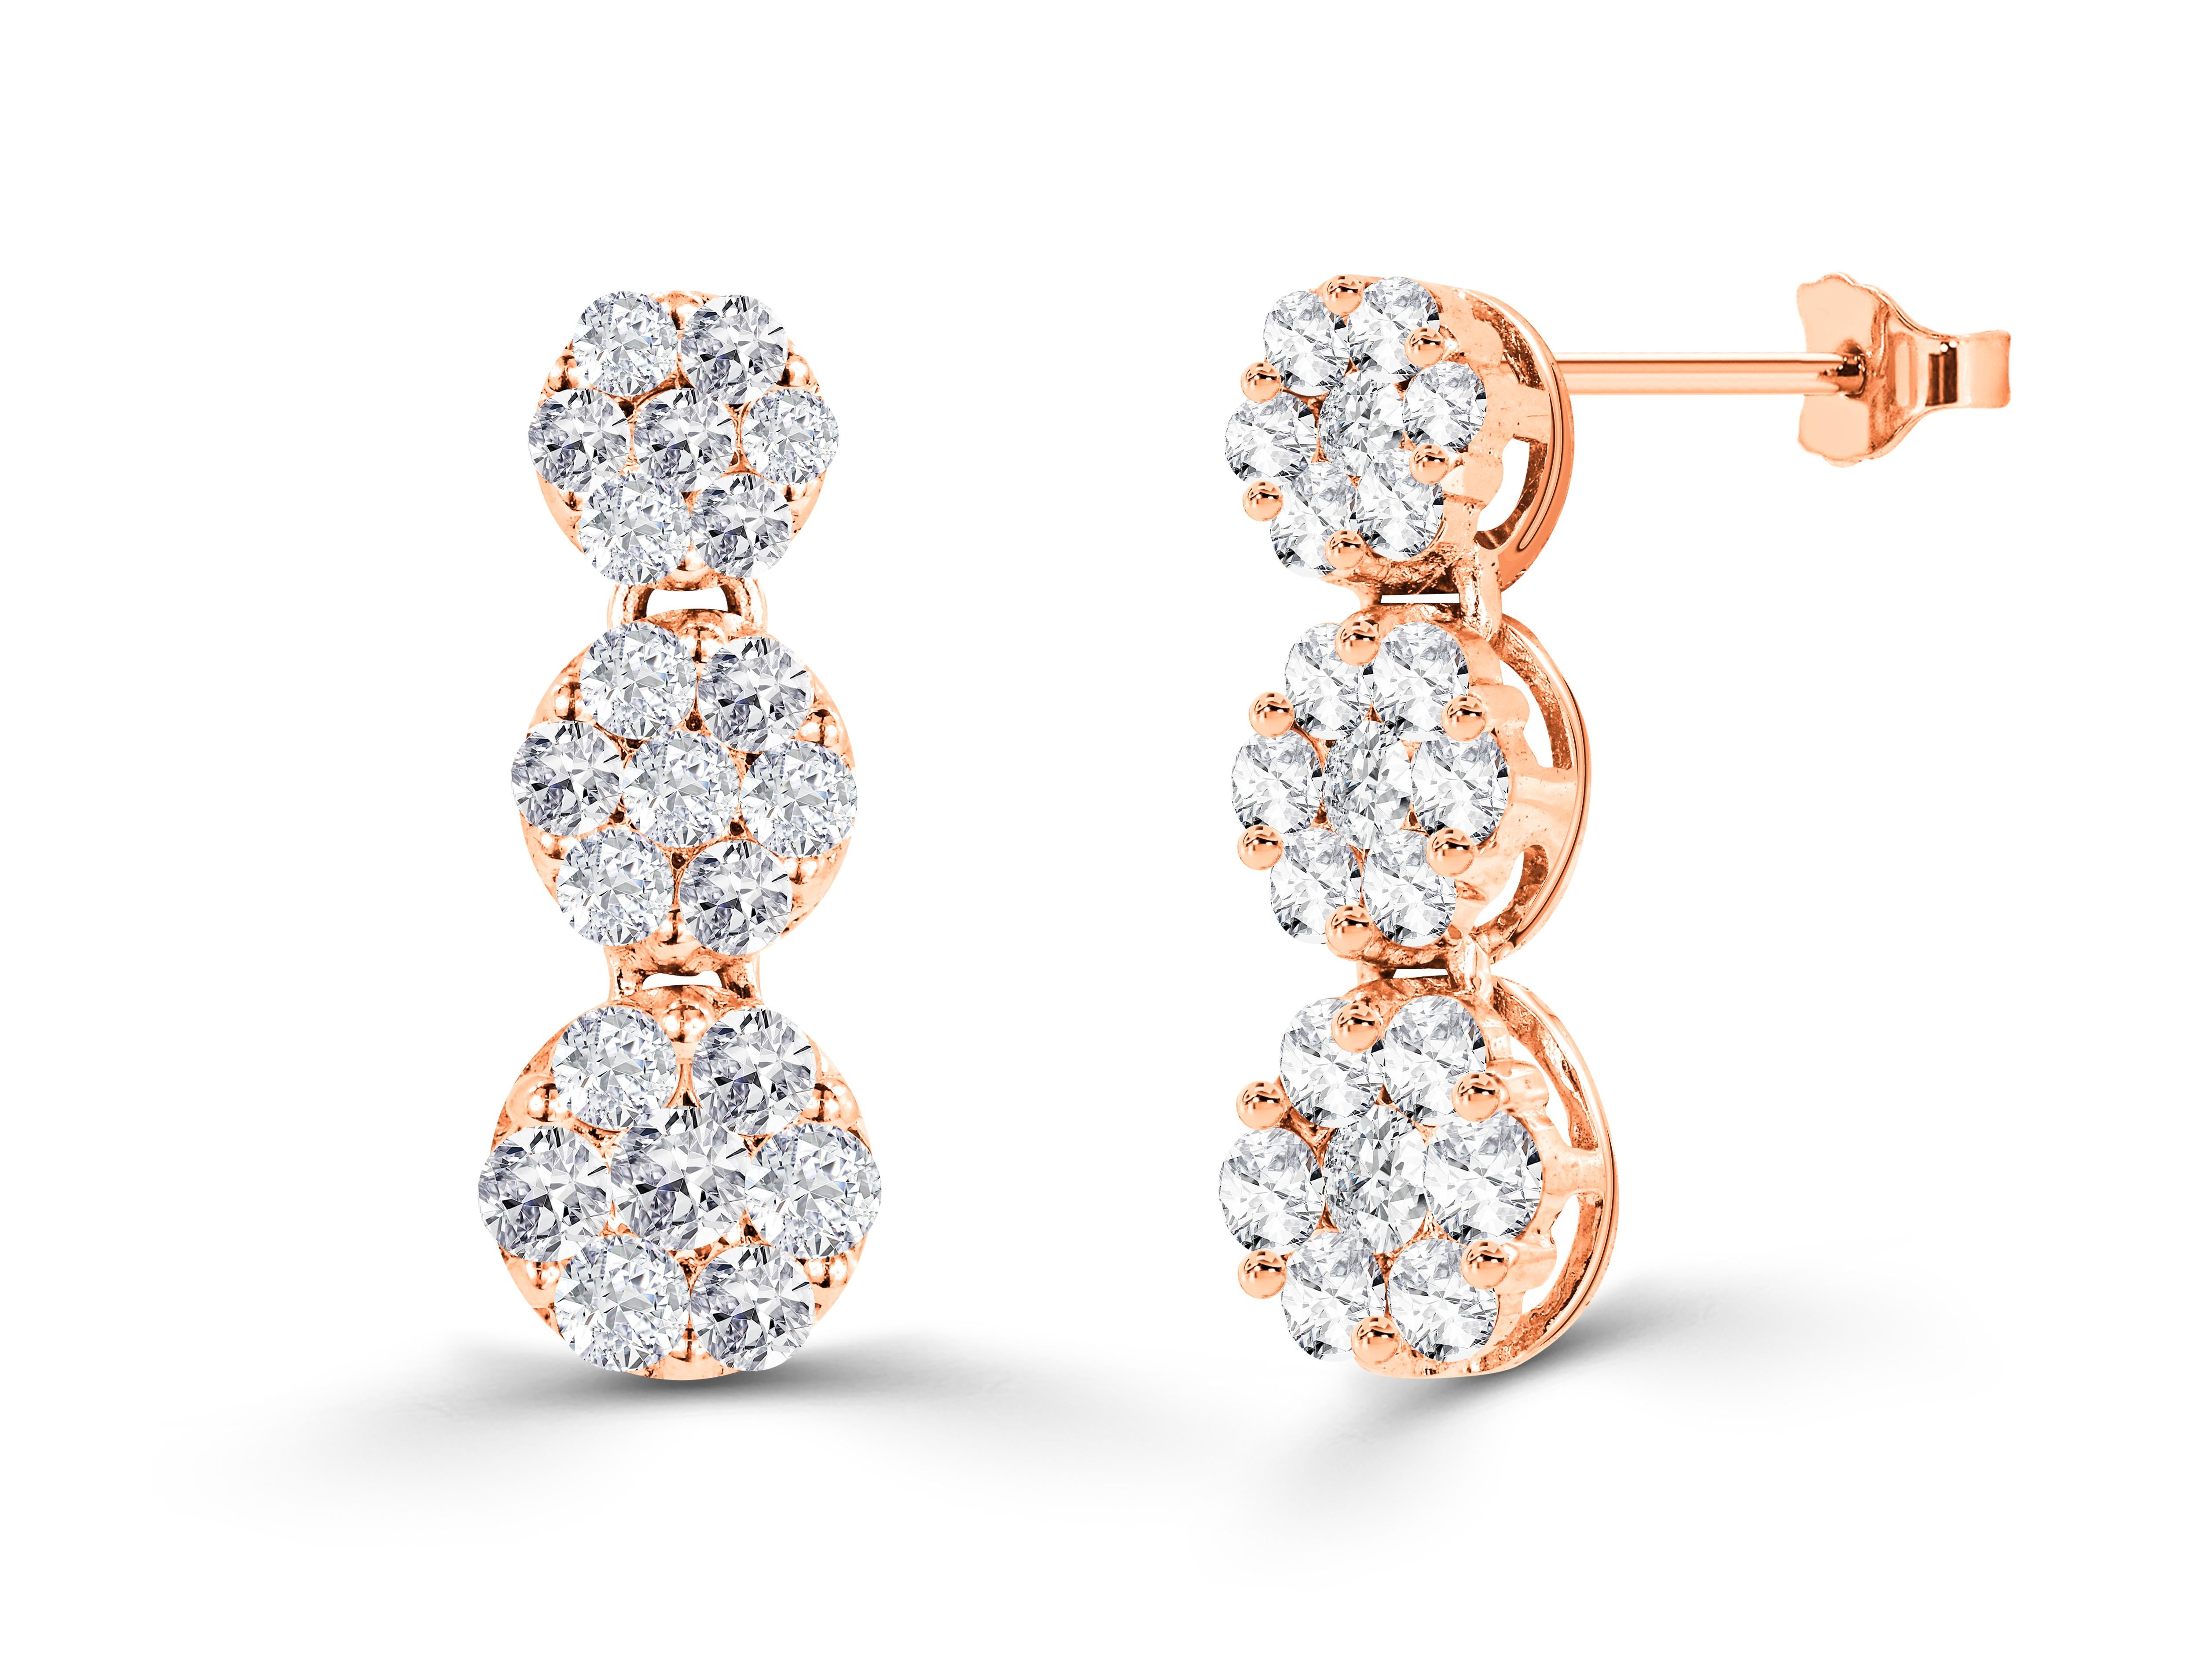 0.85 Ct Diamond Flower Drop Earrings in 14K Gold, Round Brilliant cut diamond earrings, Natural Diamond Earrings, Stud earrings, Heavy End Earrings.

Jewels By Tarry presents to you a beautiful Earring collection with natural diamonds that last